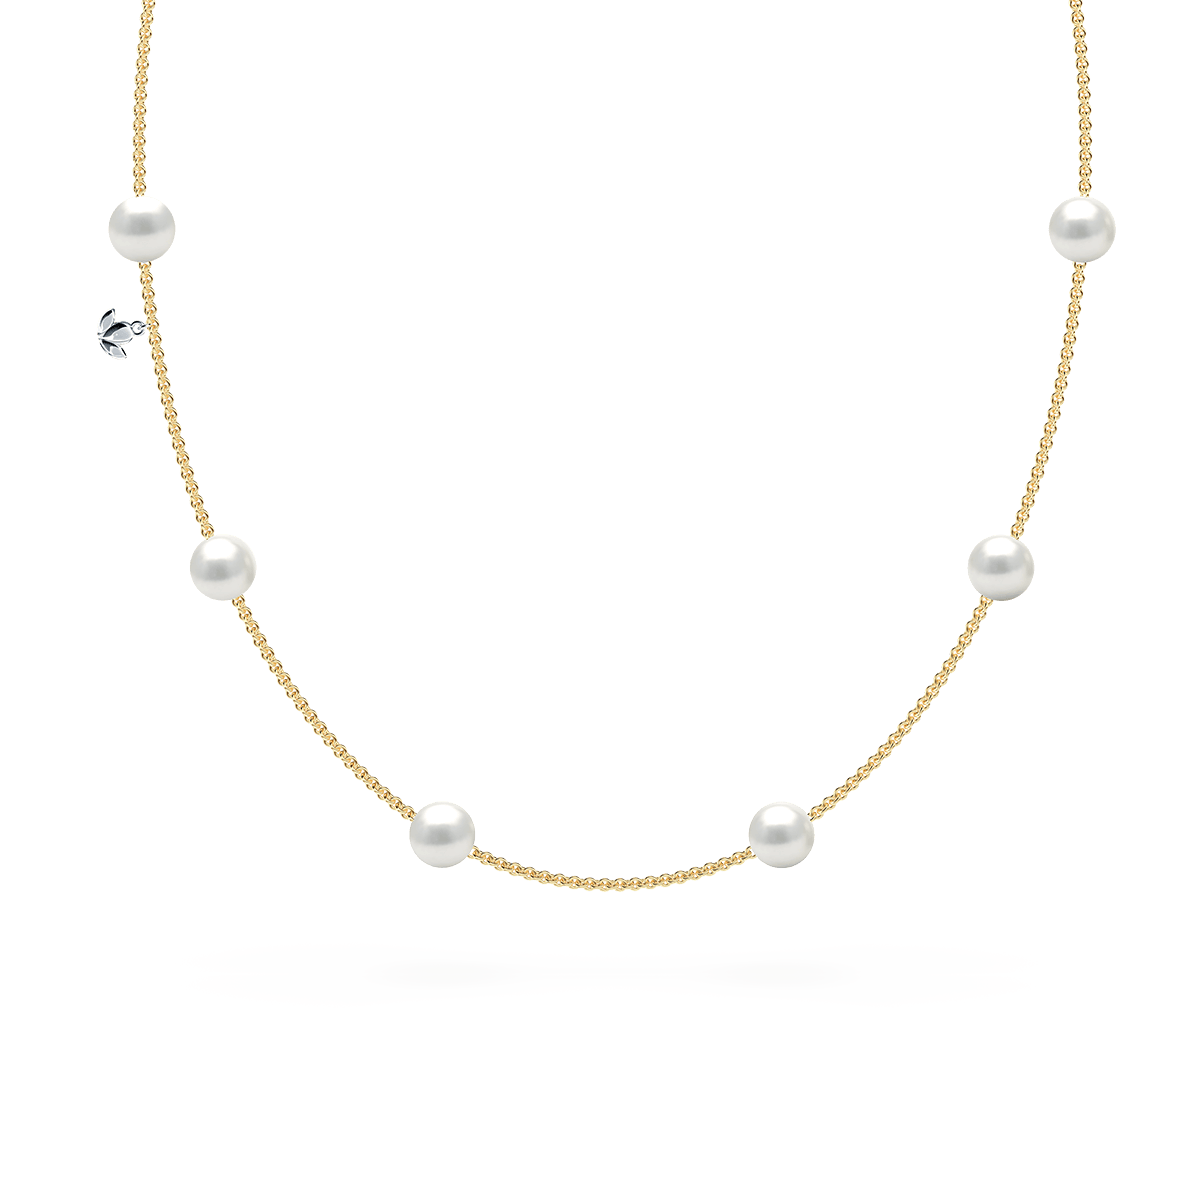 Single Large Round Pearl on Gold Chain Necklace